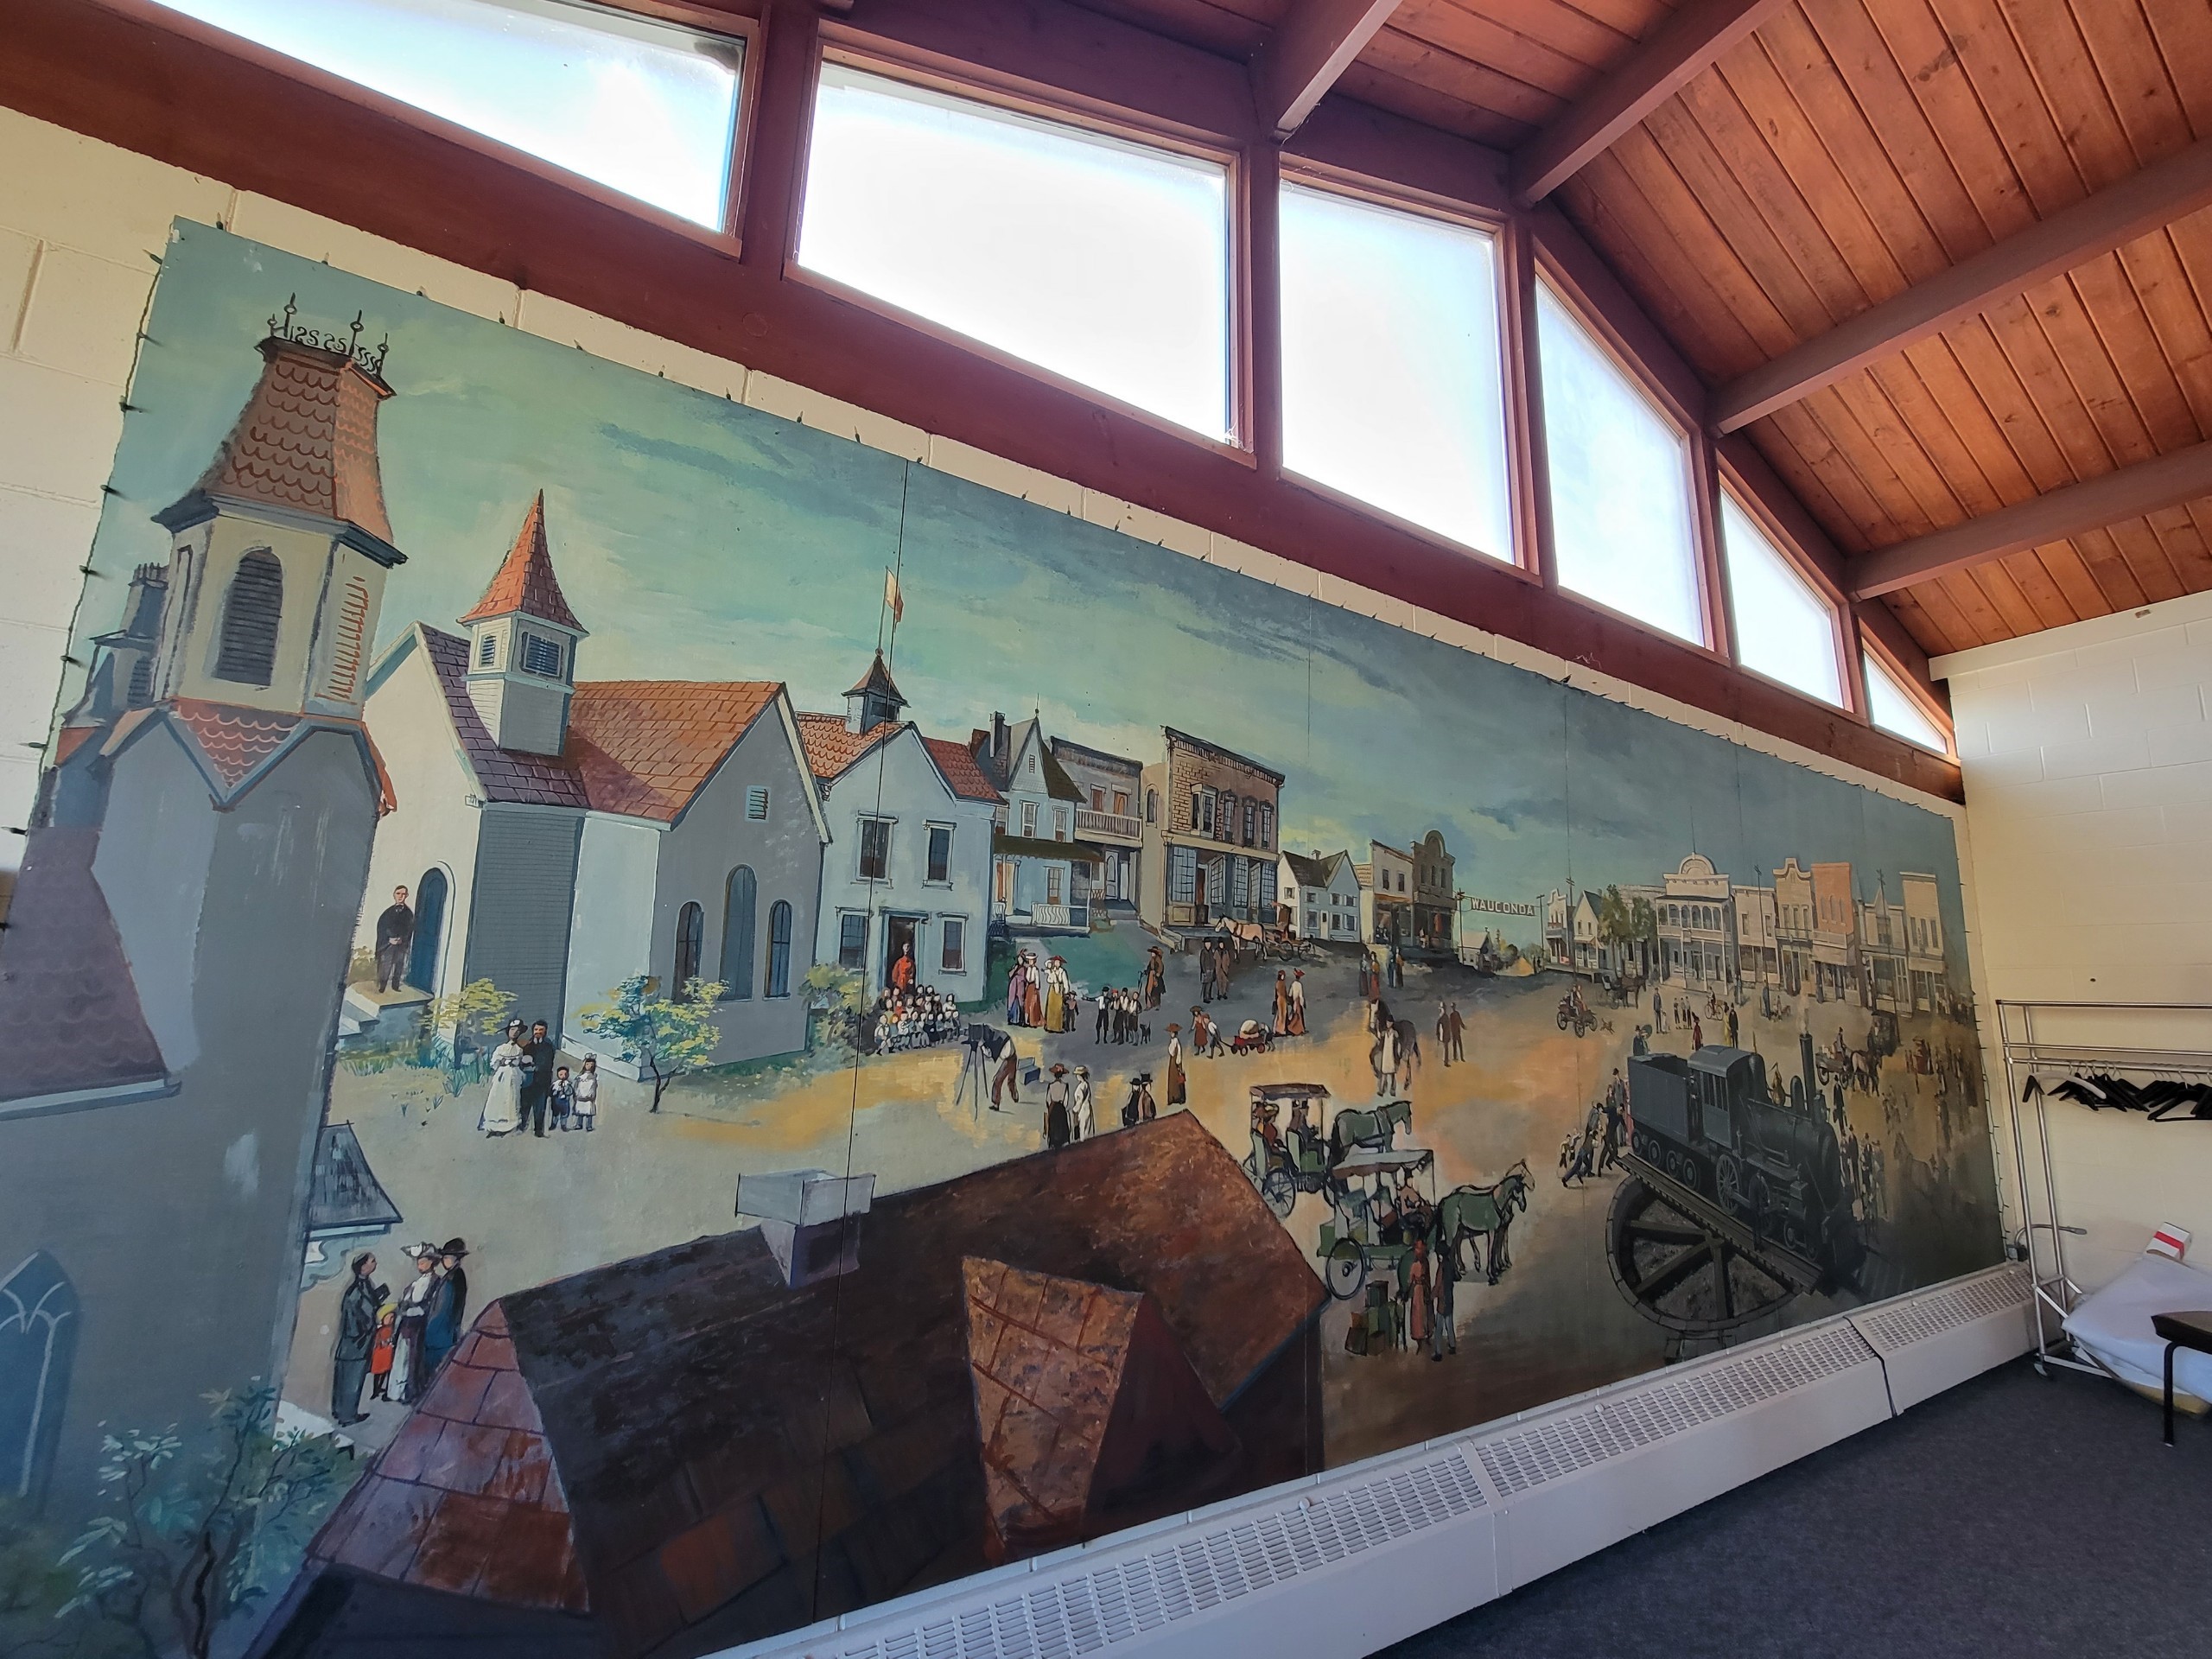 Photo of the mural at the Federated Church in Wauconda